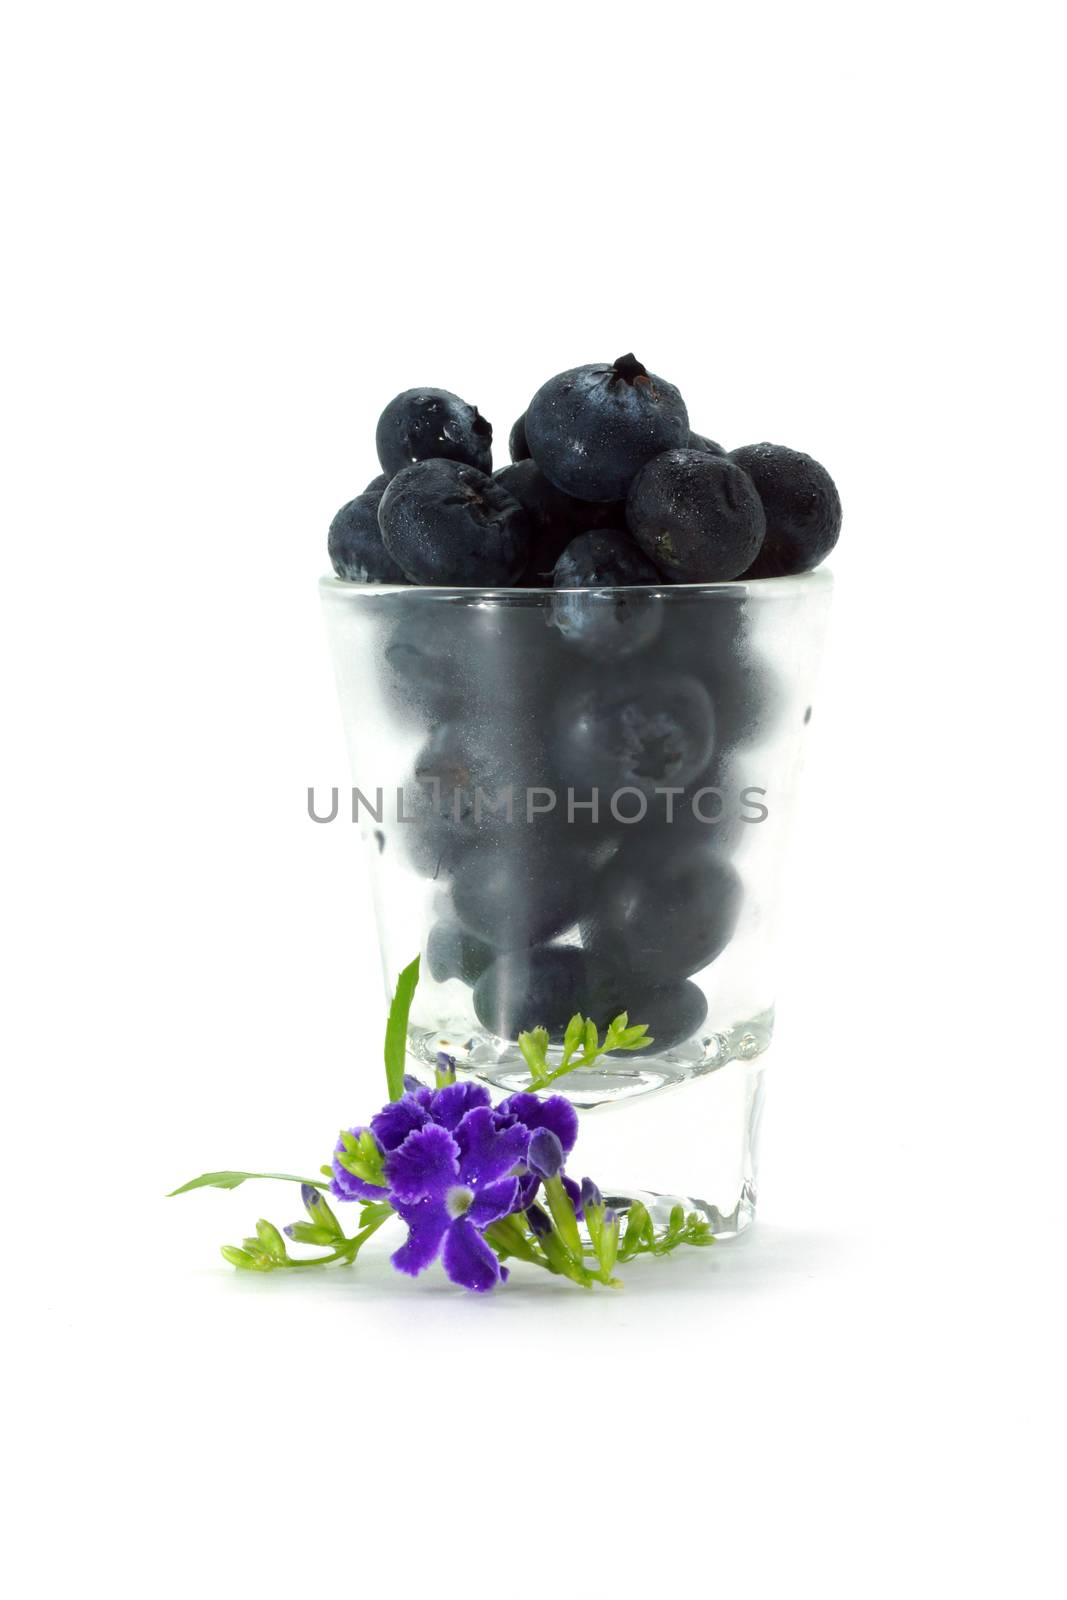 Blueberries with leaves on white background by Noppharat_th